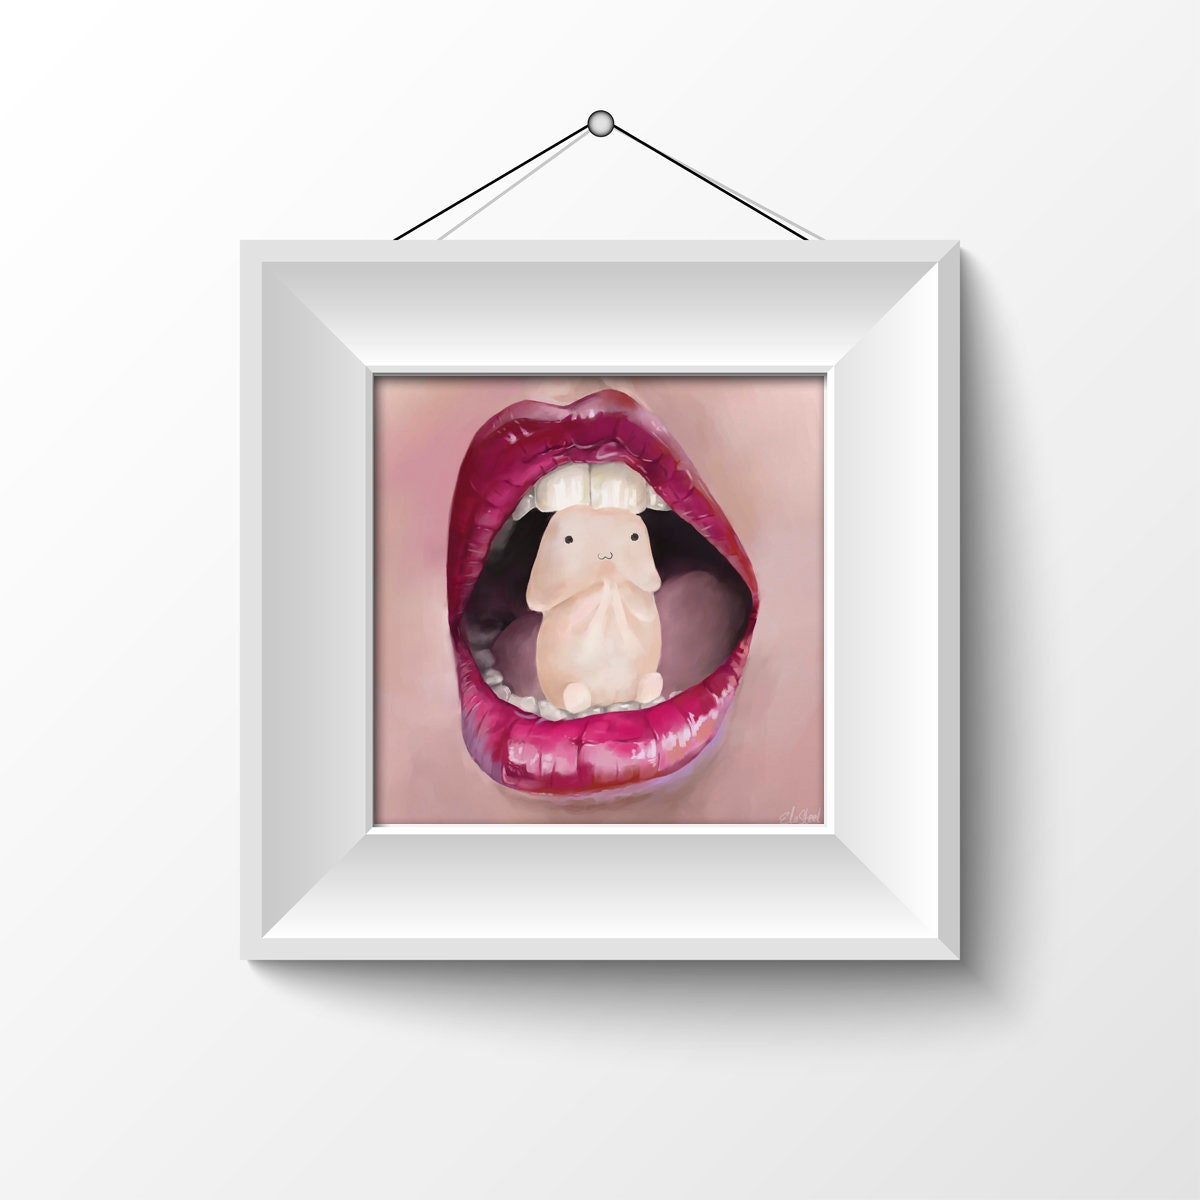 PRINT Erotic Art Sexy Mouth With Little Squishy Toy Penis